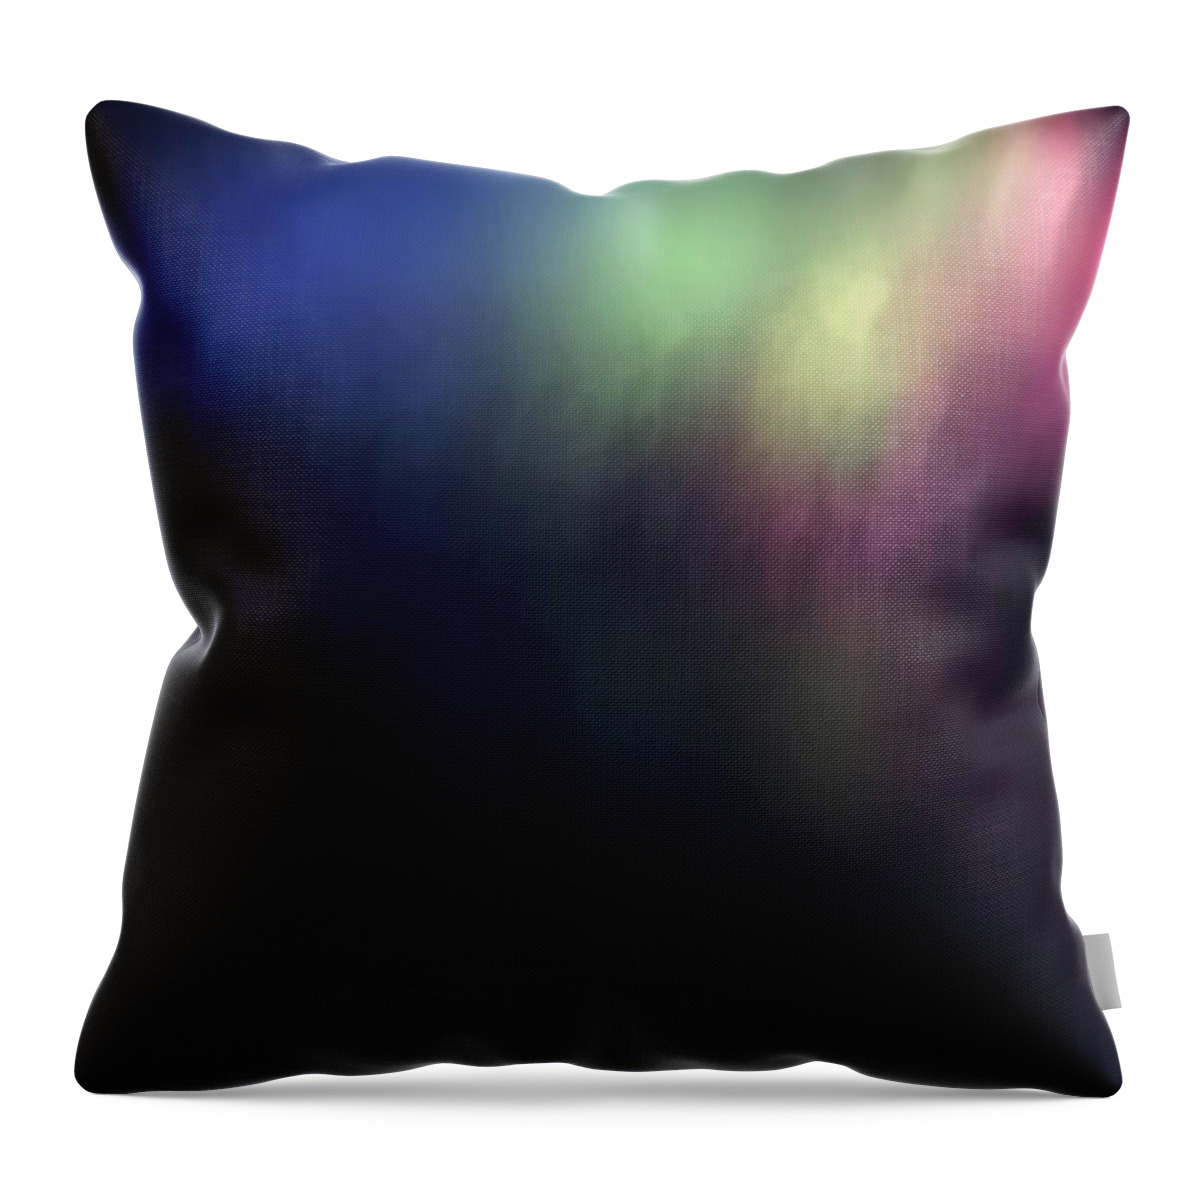 Corday Throw Pillow featuring the photograph Light Paintings - Monet Meditation by Kathy Corday